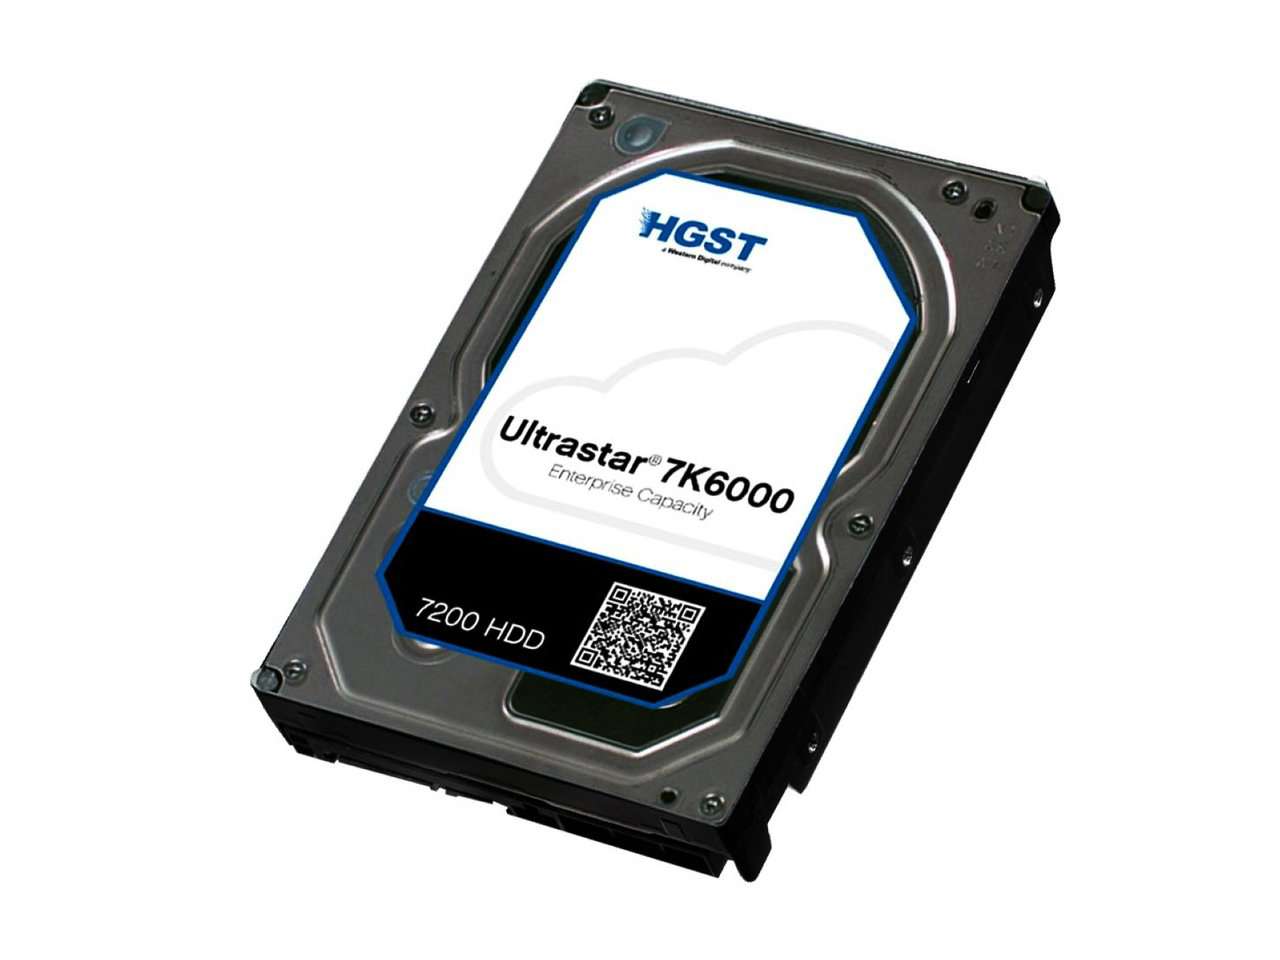 HGST Ultrastar 7K6000 0F22825  HUS726040AL5215 4TB 7.2K RPM SAS 12Gb/s 512e 128MB Cache 3.5" TCG FIPS HDD